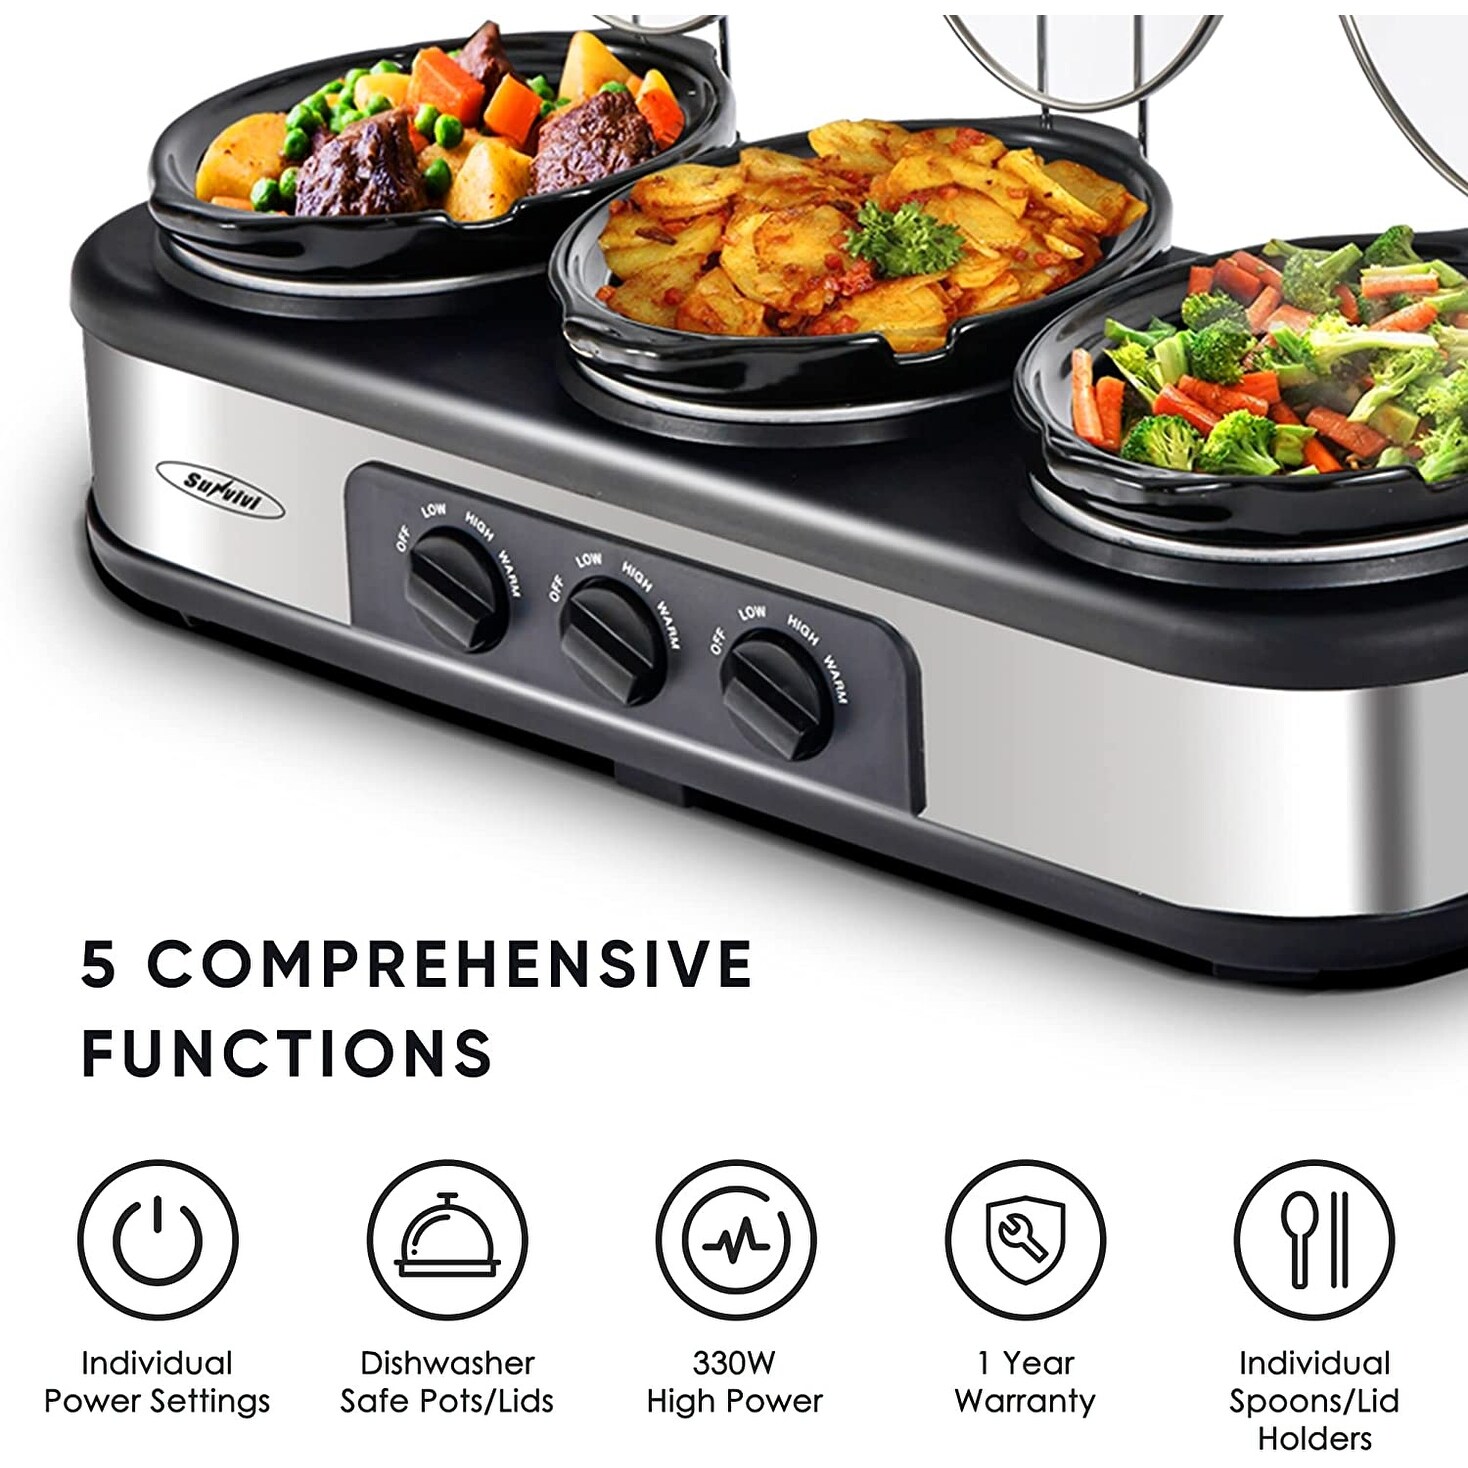 https://ak1.ostkcdn.com/images/products/is/images/direct/c46e702fbb5c6e19d0bb152c83293cdf6cb6fa64/Slow-Cooker%2C-Triple-Slow-Cooker-Buffet-Server-3-Pot-Food-Warmer%2C-3-Section-1.5-Quart-Oval-Slow-Cooker-Buffet-Food-Warmer.jpg